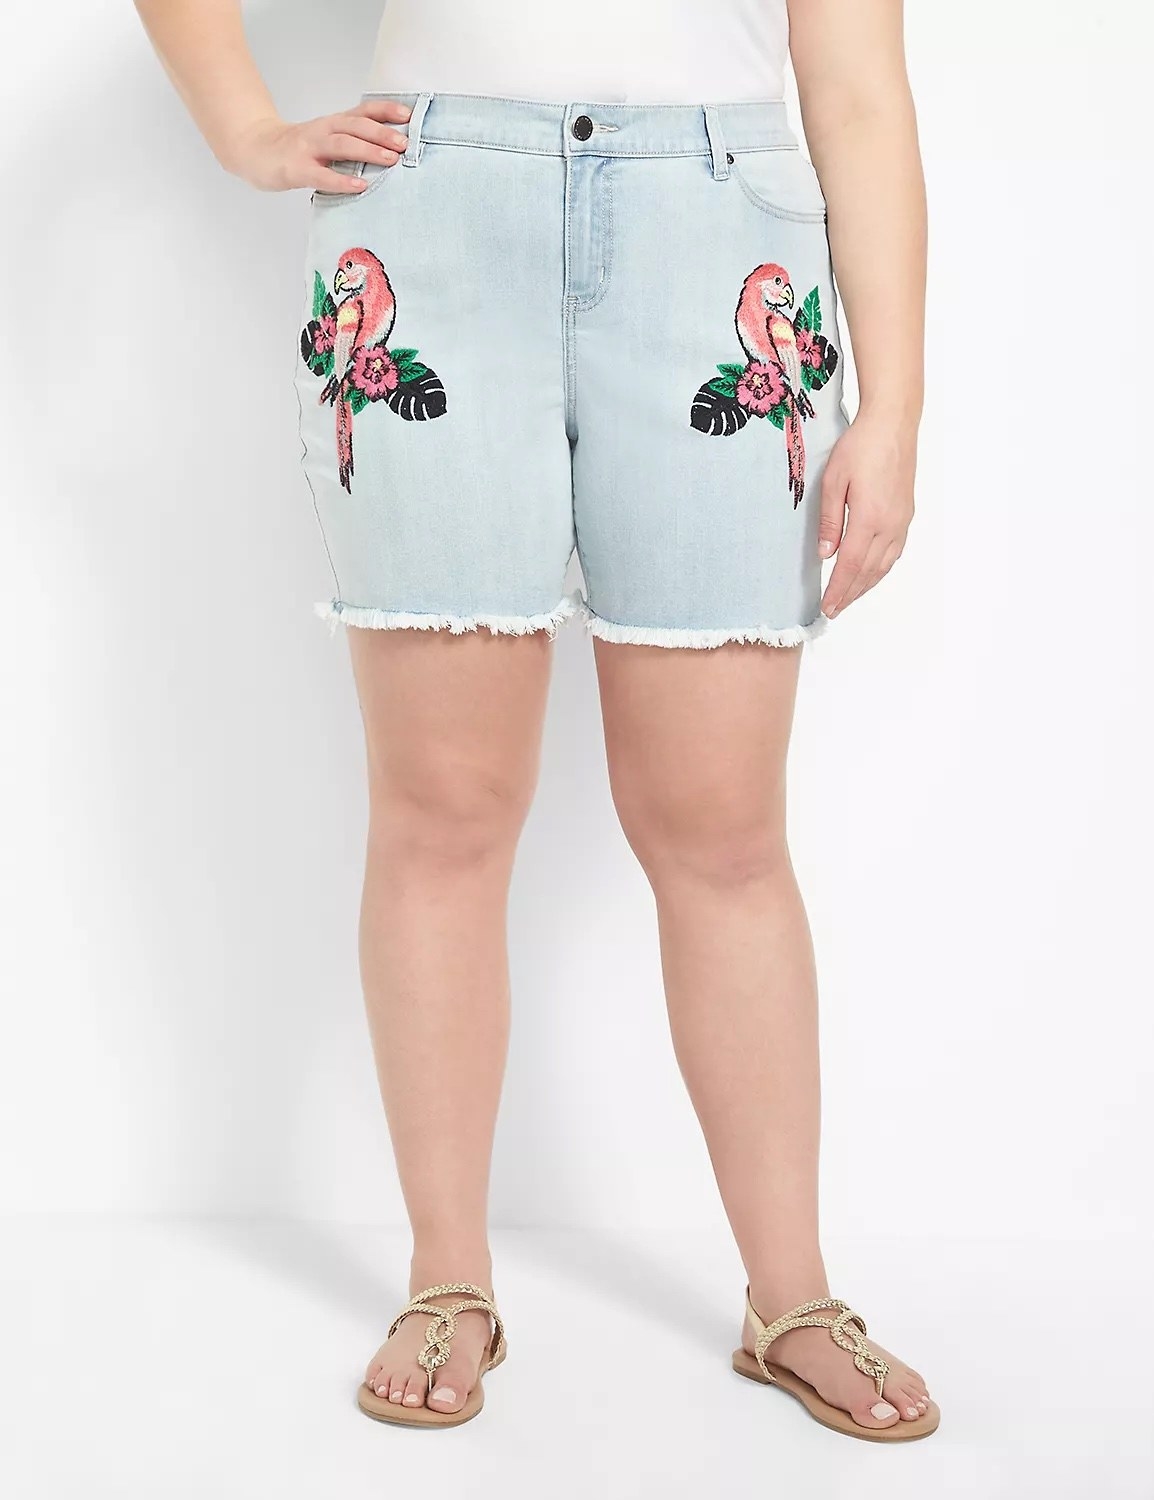 Model wearing light denim shorts with green and pink parrots and gold sandals